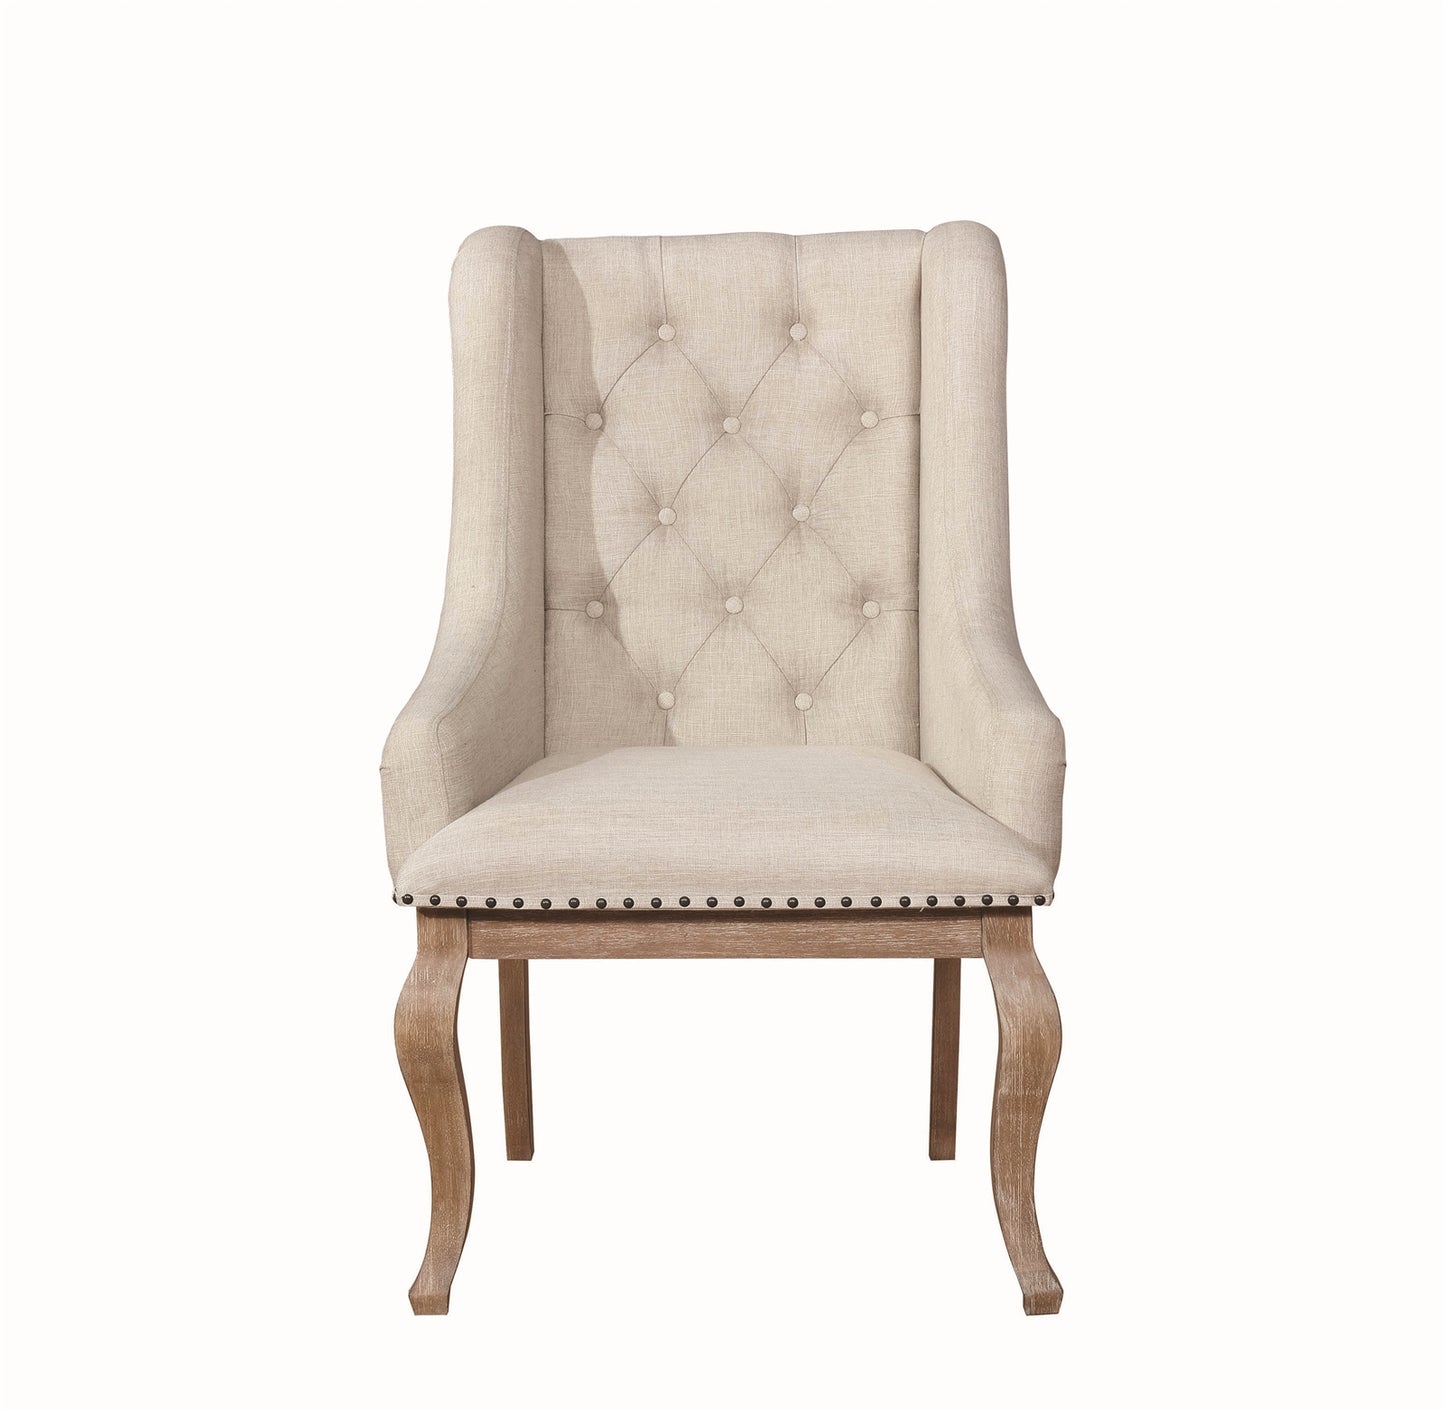 Glen Cove Traditional Cream Upholstered Arm Chair Set of 2